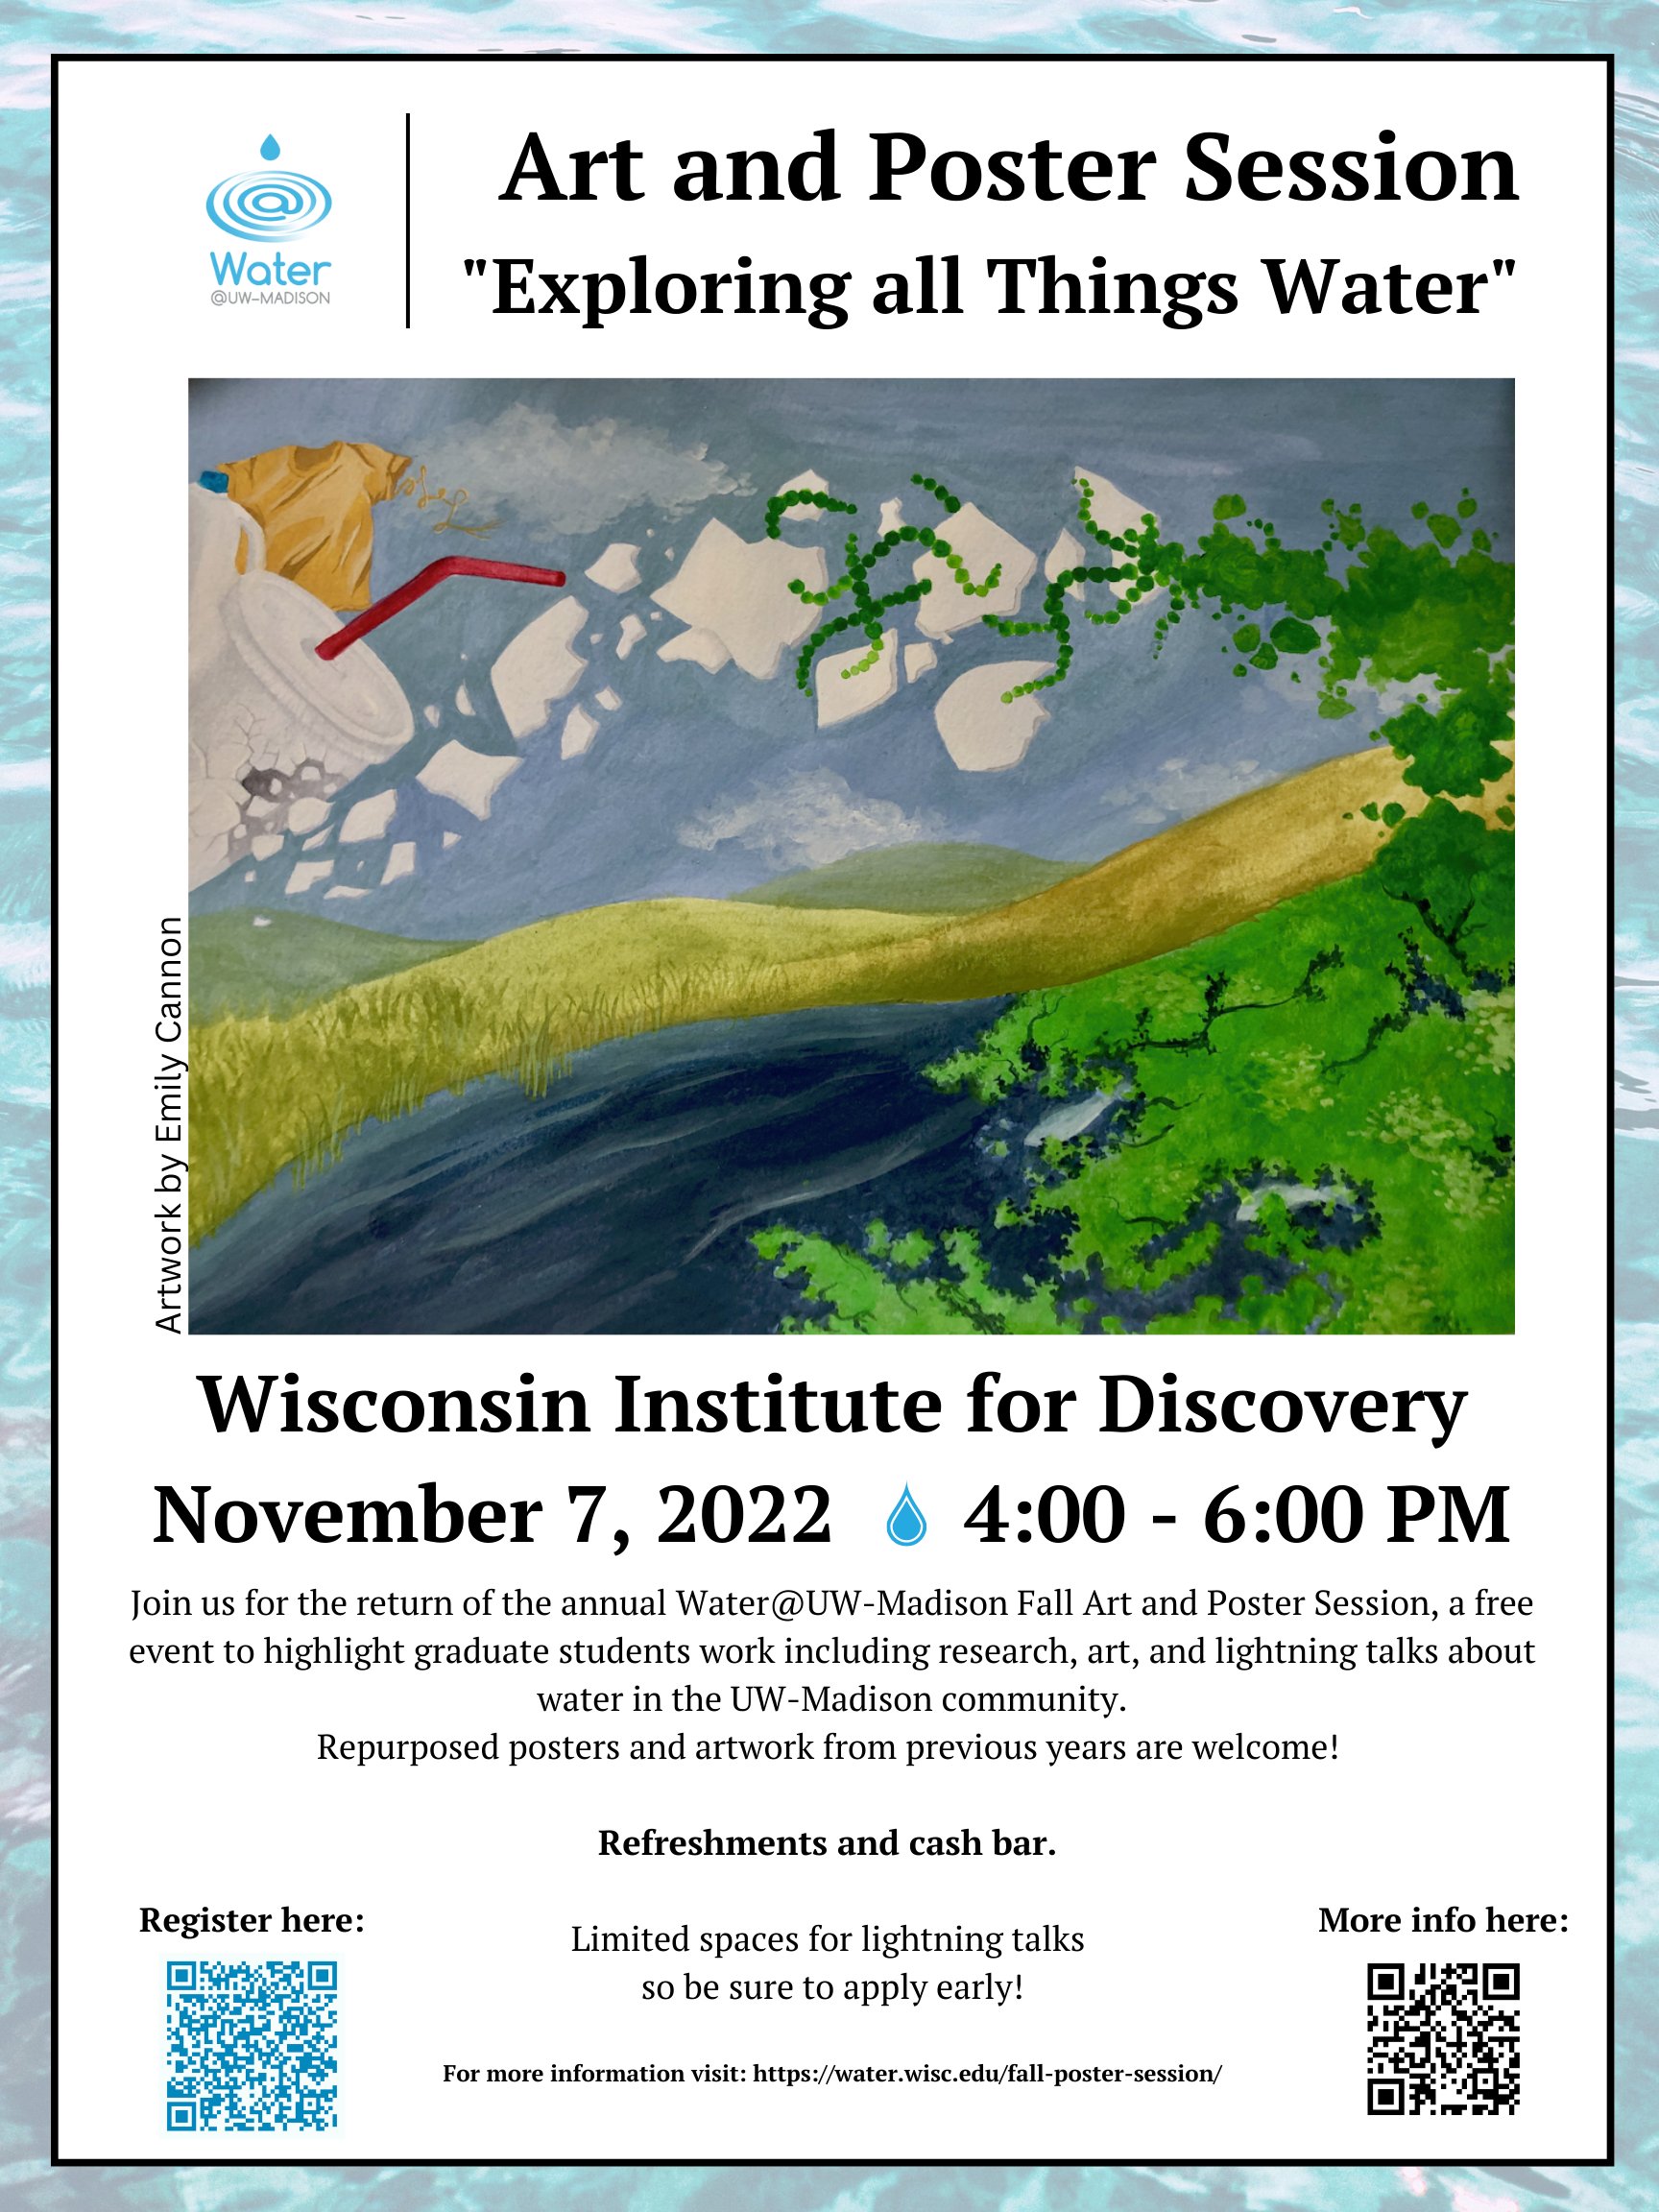 Water@UW-Madison on X: We're dusting off our Twitter account to tell you  to join us November 7th from 4 - 6pm at the Wisconsin Institute for  Discovery for our Art and Poster